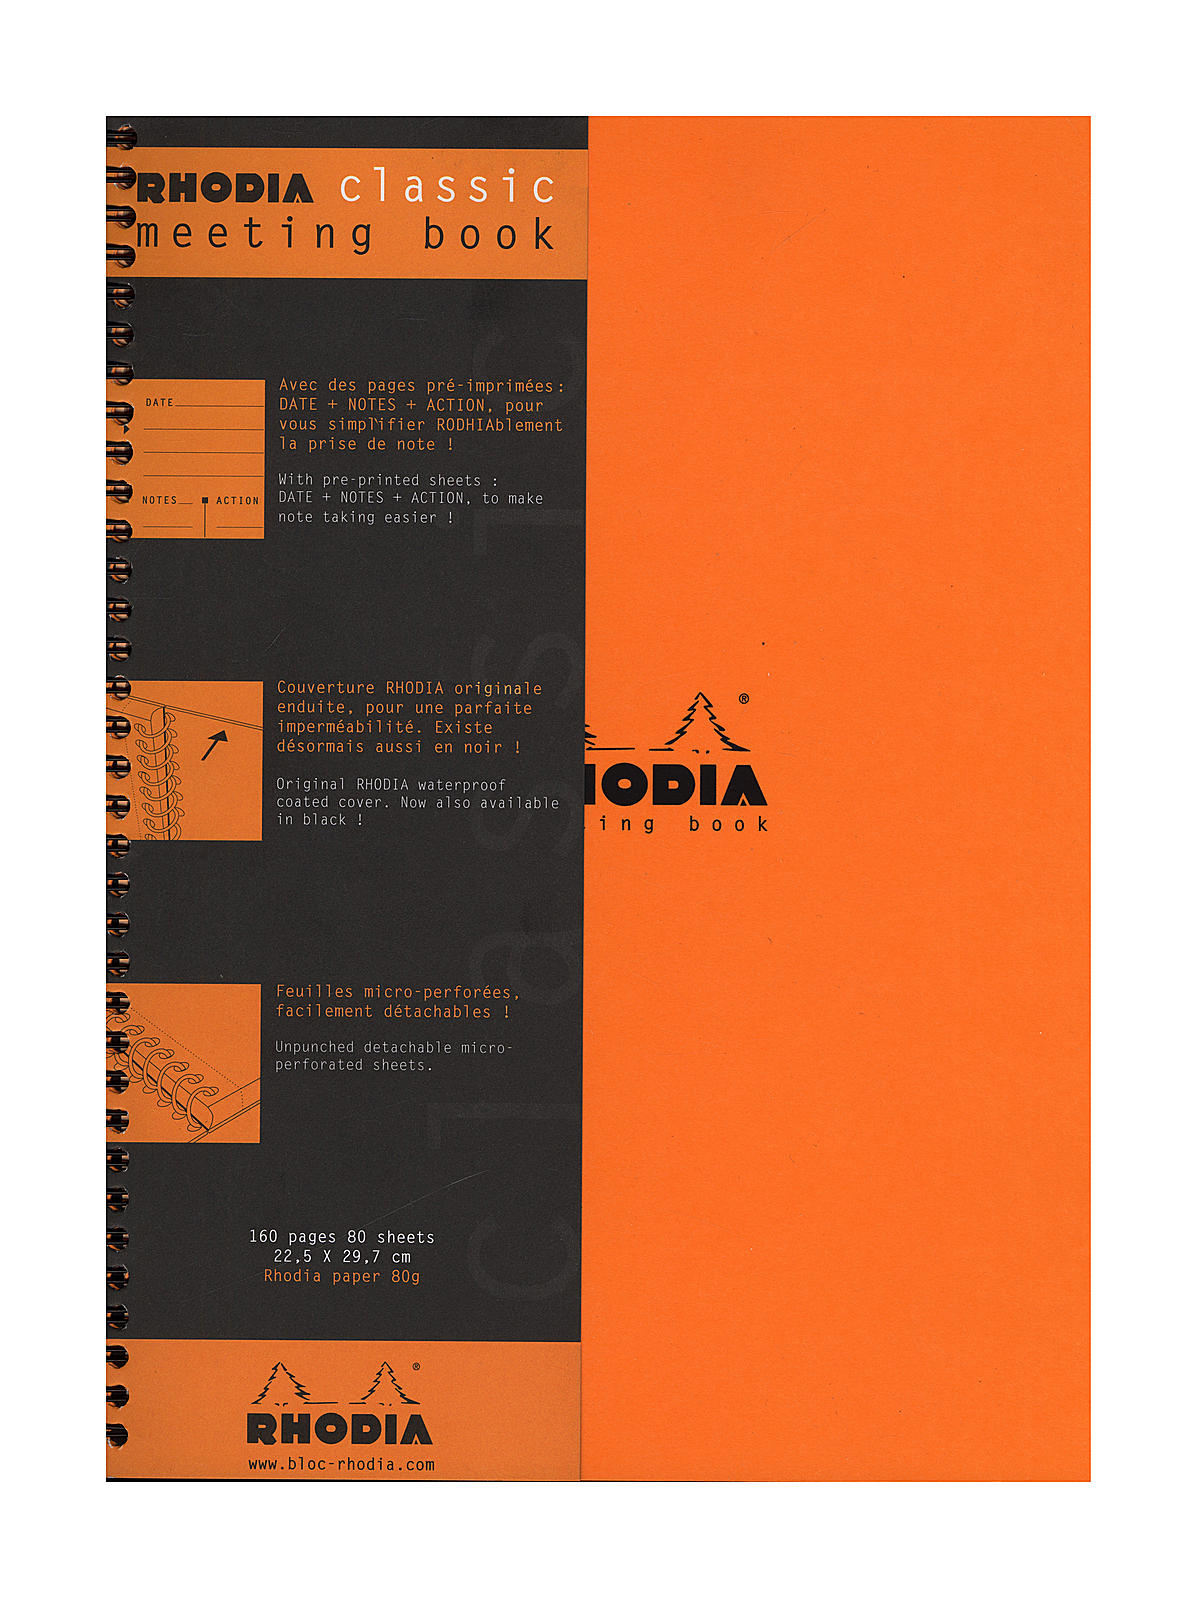 Meeting Books 8 1 4 In. X 11 3 4 In. Orange 80 Sheets